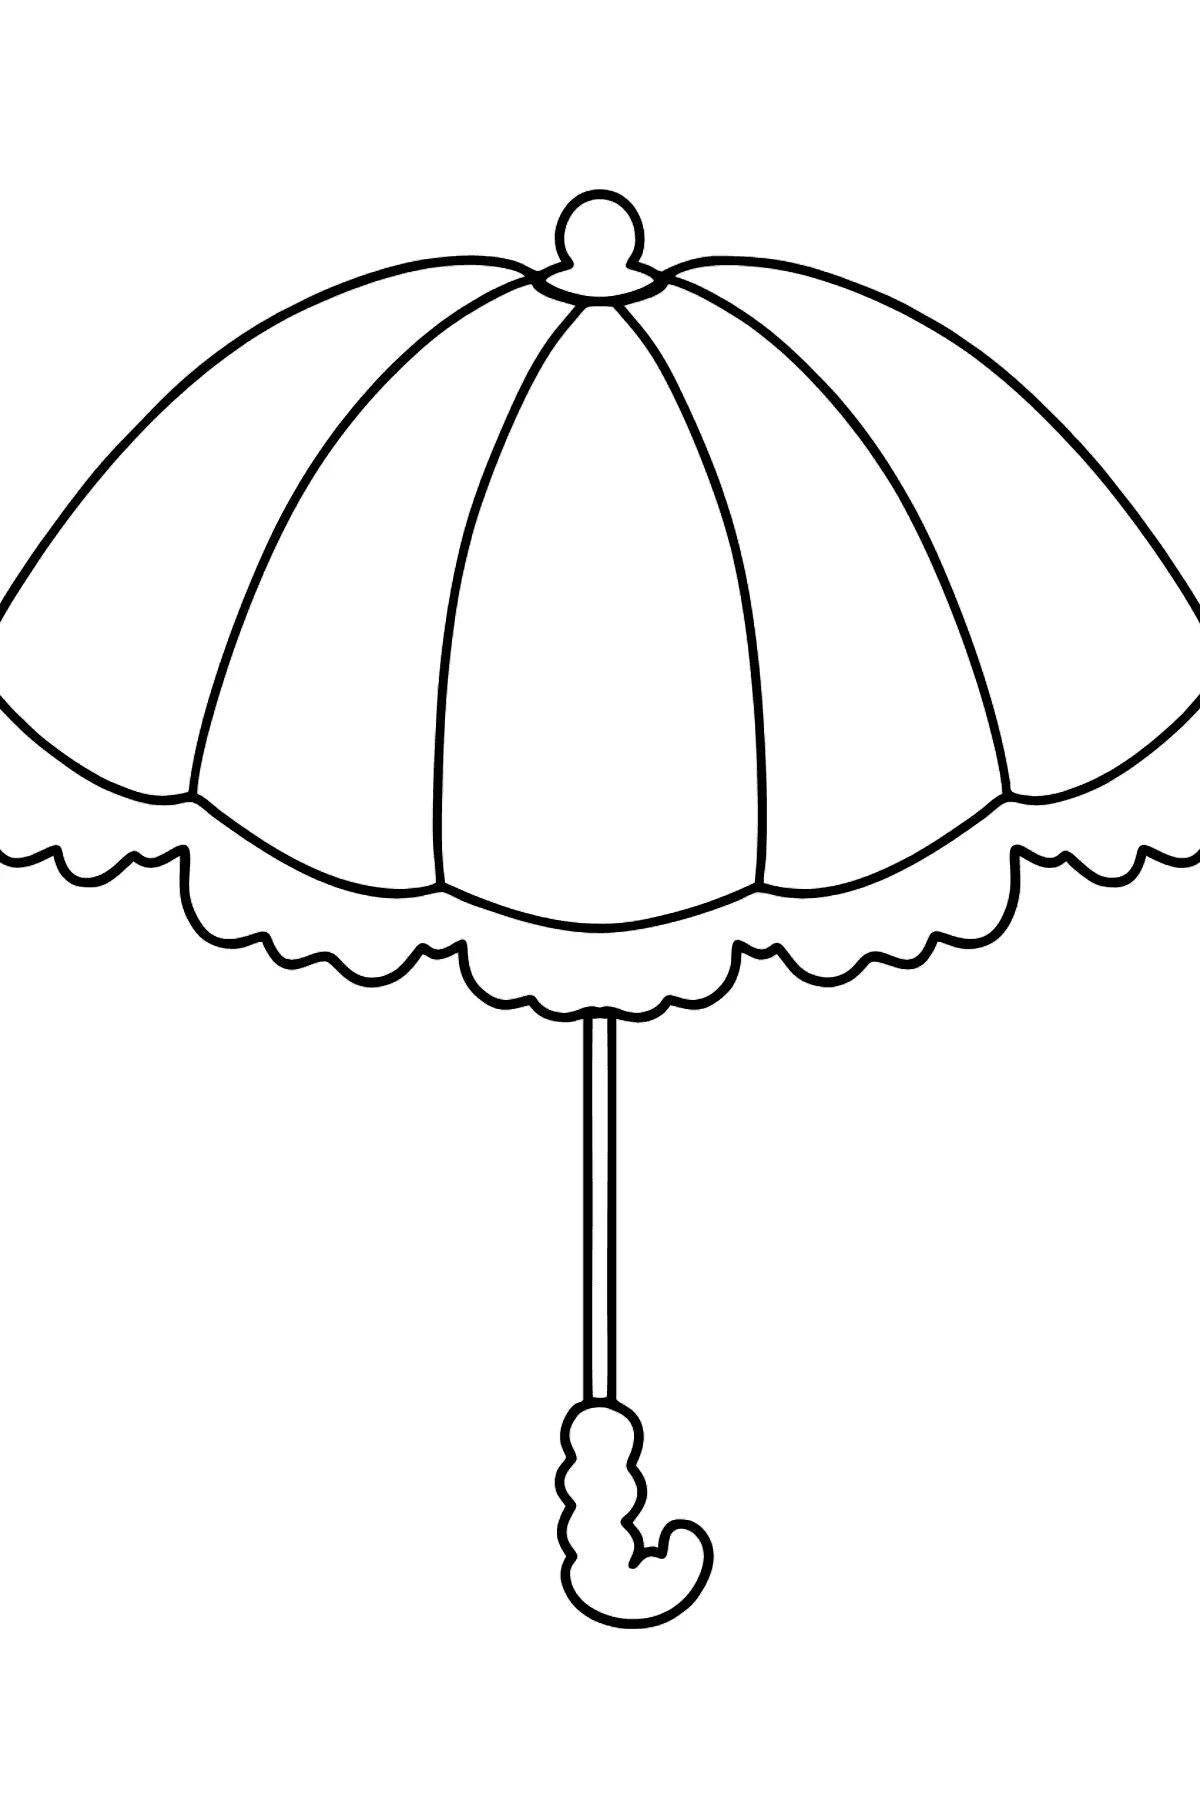 Fun umbrella coloring book for 4-5 year olds